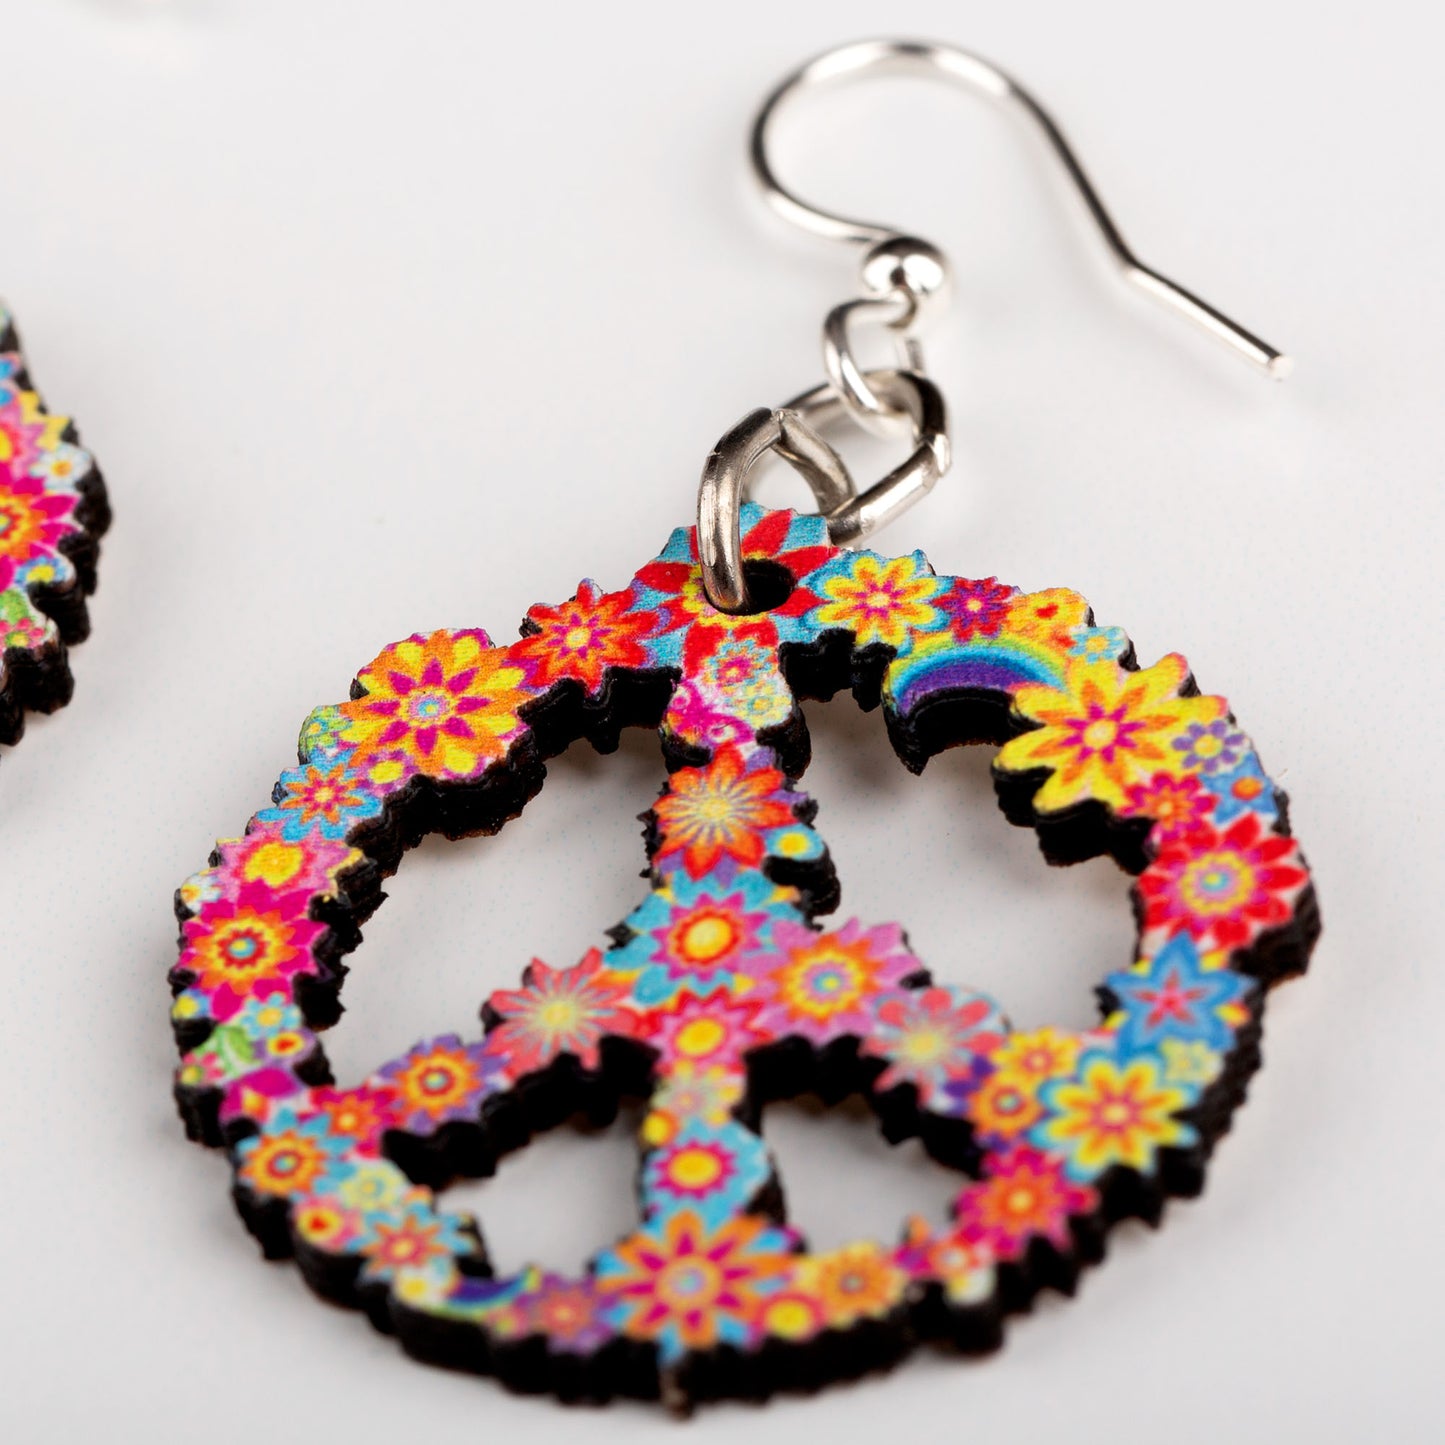 Blossom Wooden Peace Sign Earrings